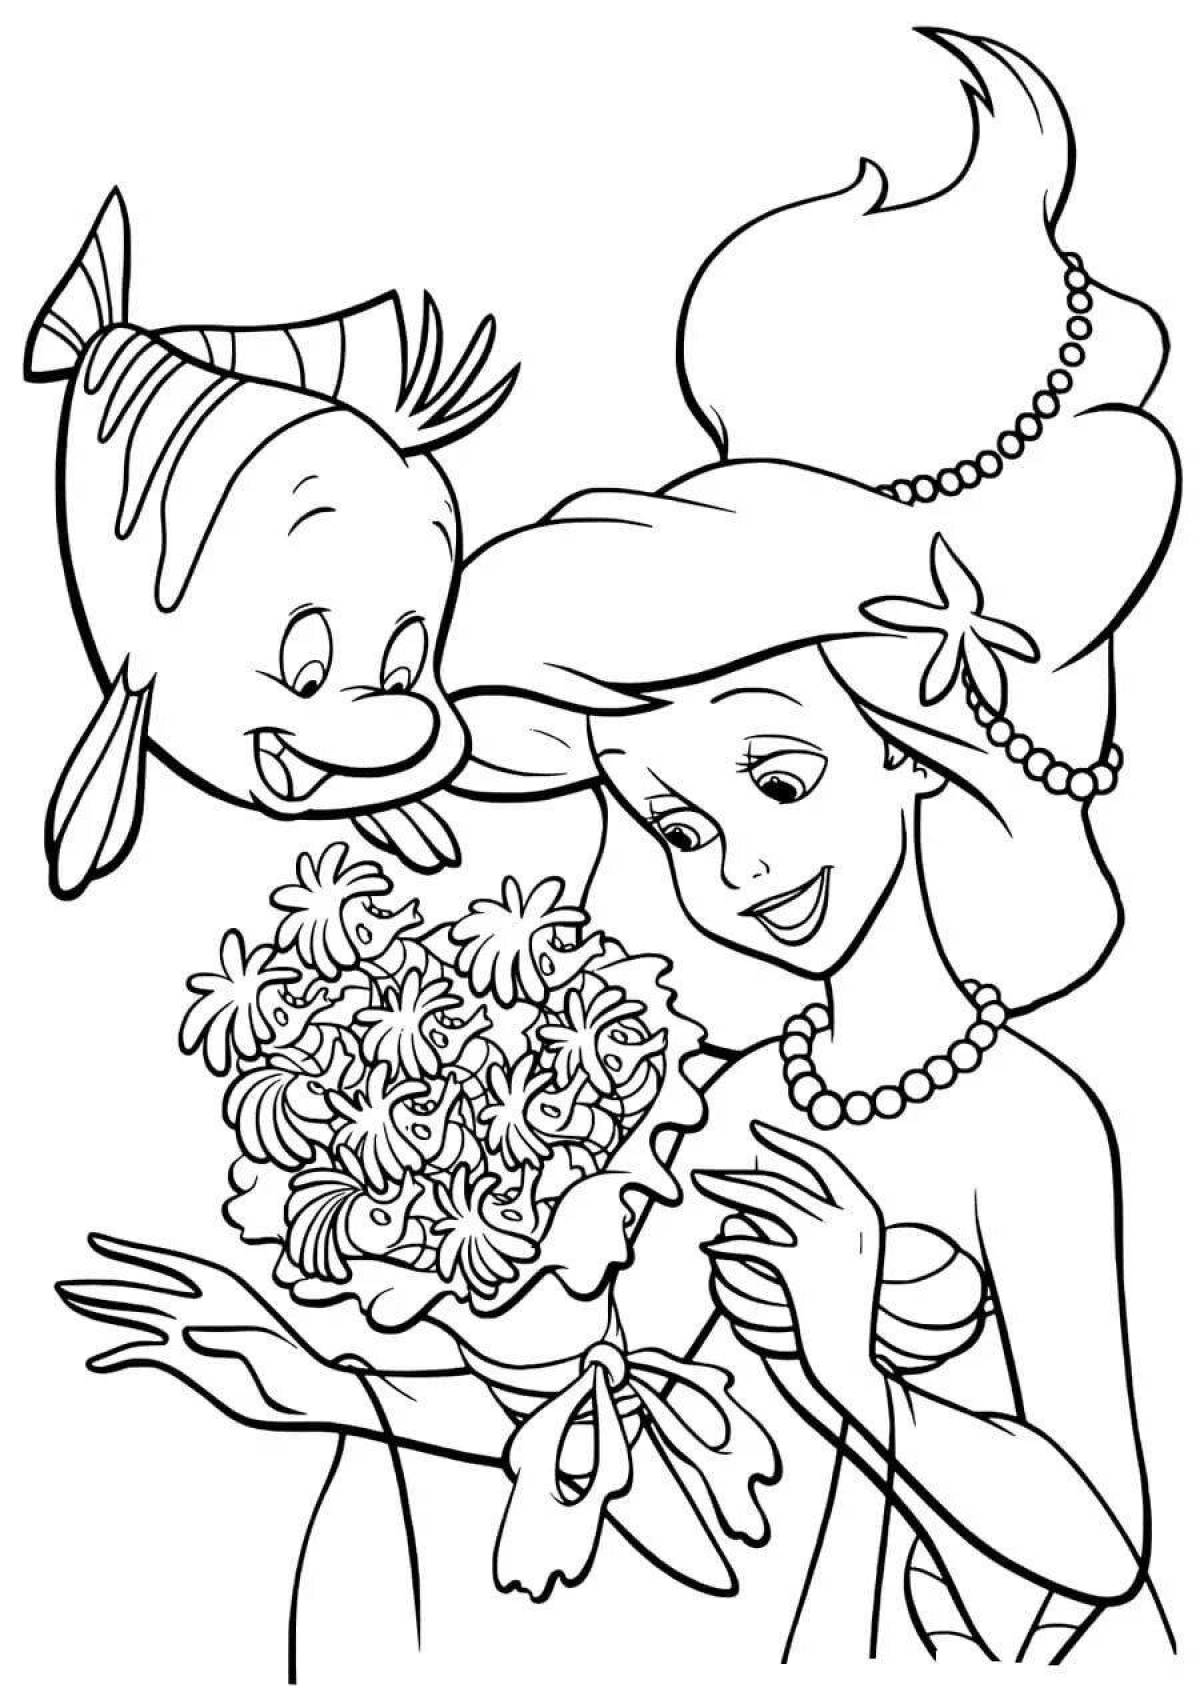 Exquisite ariel the little mermaid coloring book for girls